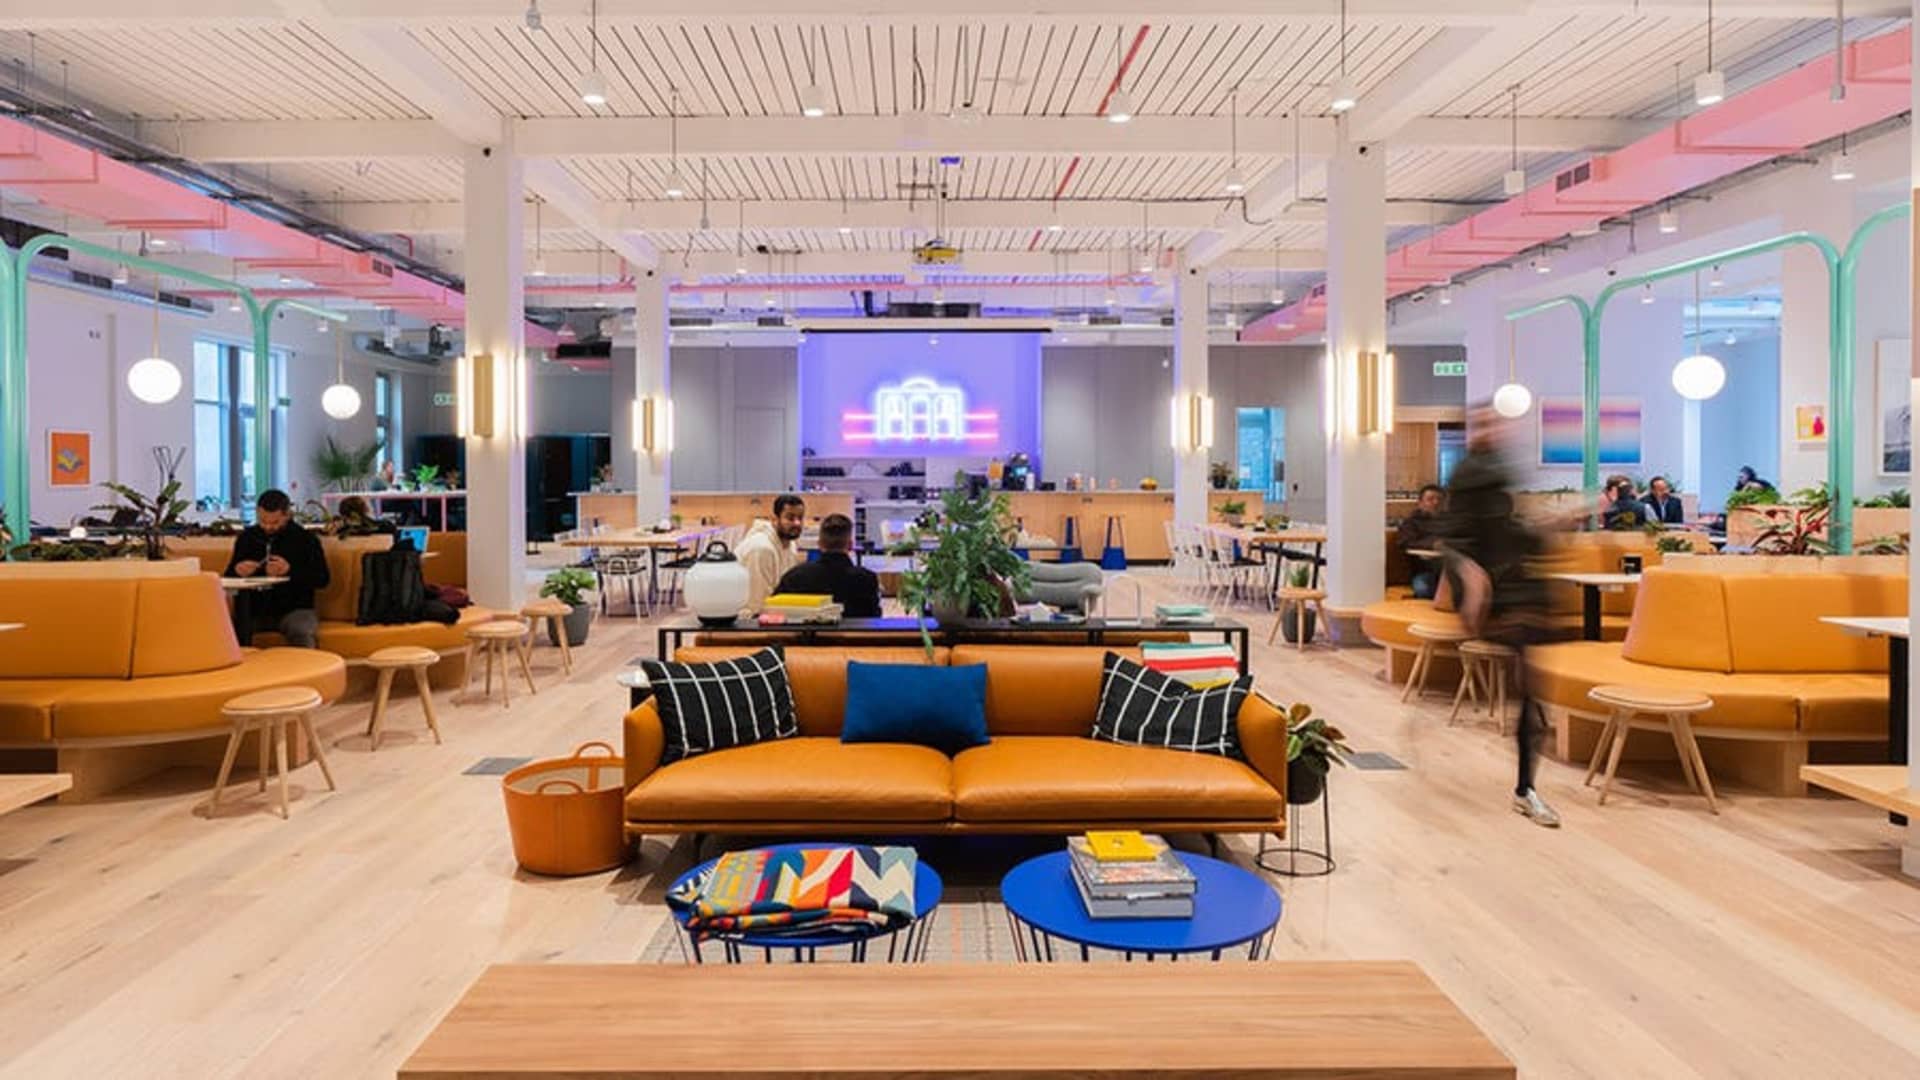 WeWork has a massive footprint in London. Its bankruptcy could shake up the city’s office market